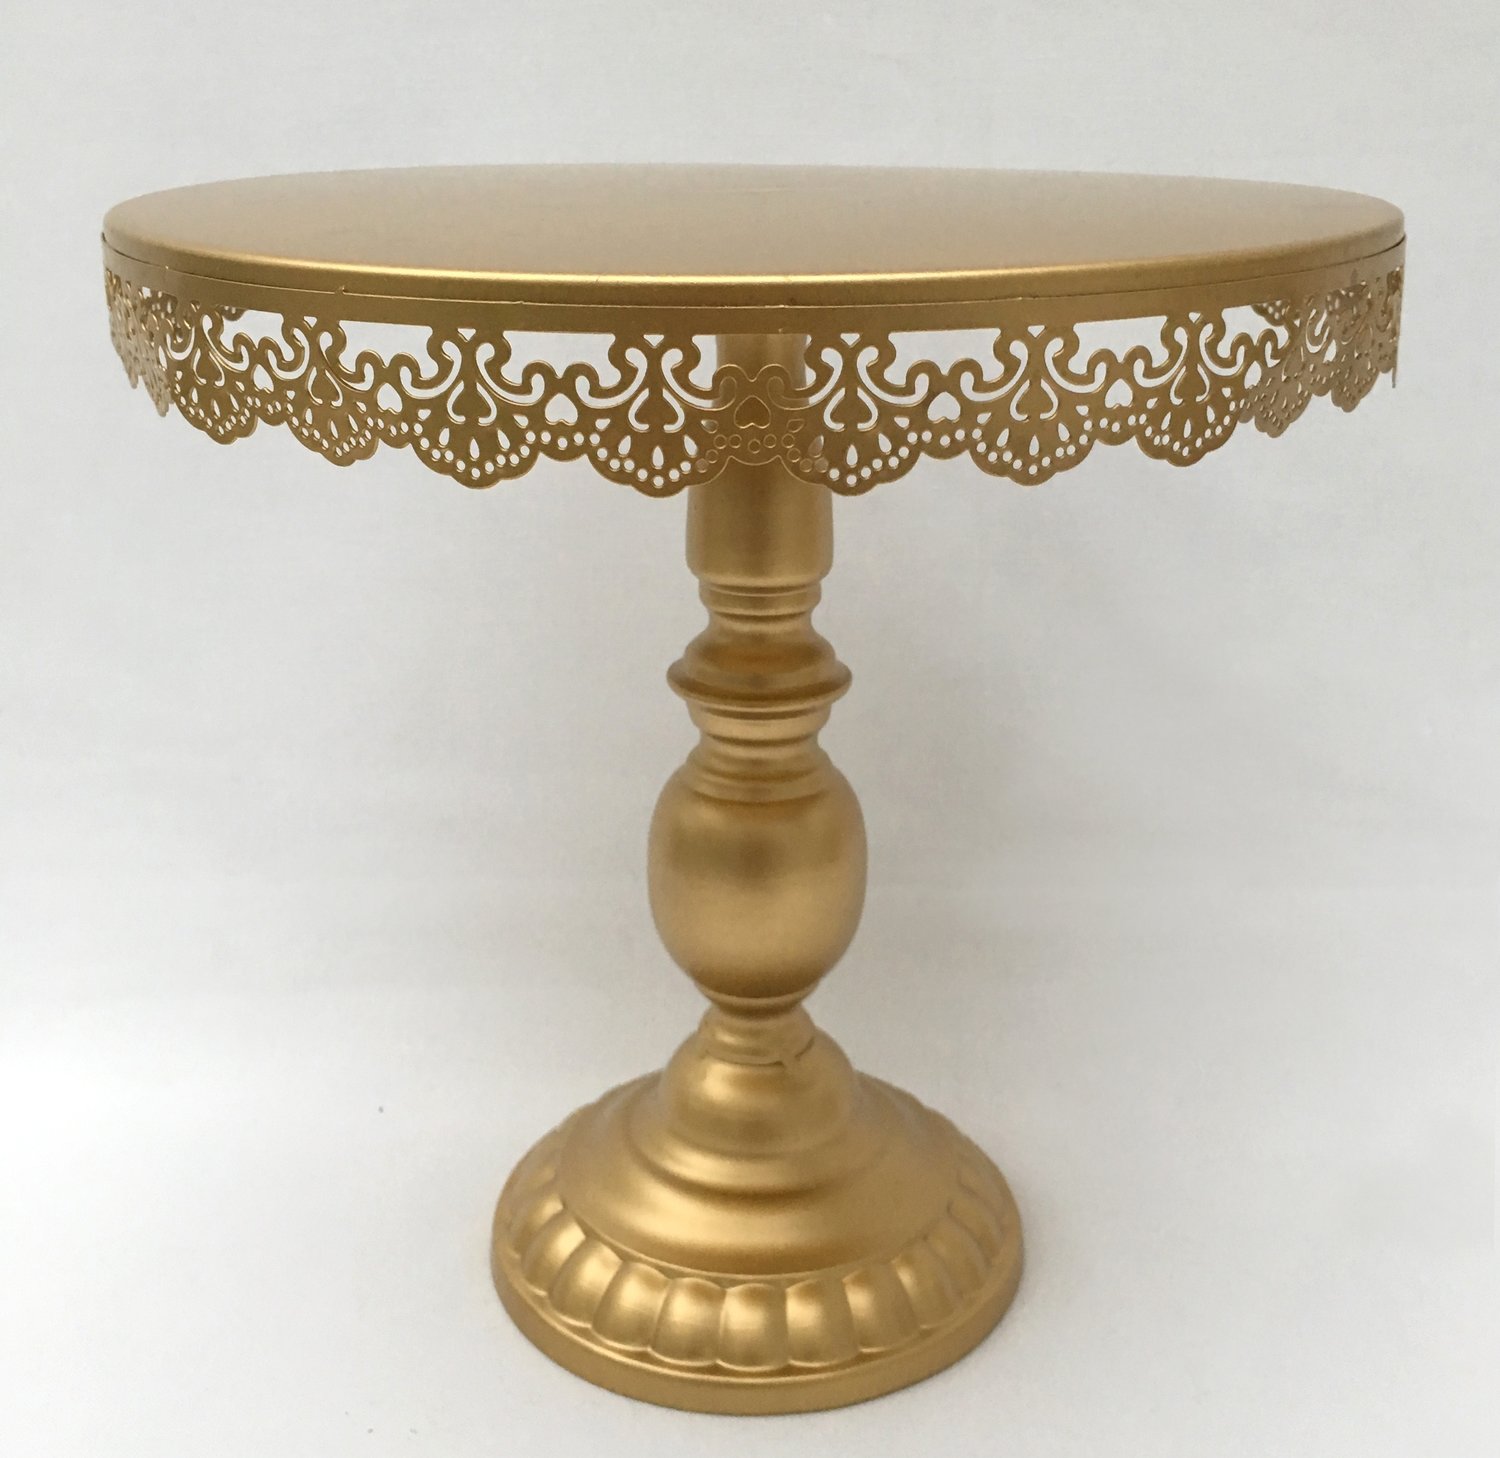 Medium Gold - Vintage with Filigree Design -  Pedestal -1 Tier Cake Stand - Code GD0034S - SMALL SIZE  - 8" ROUND X 7" TALL